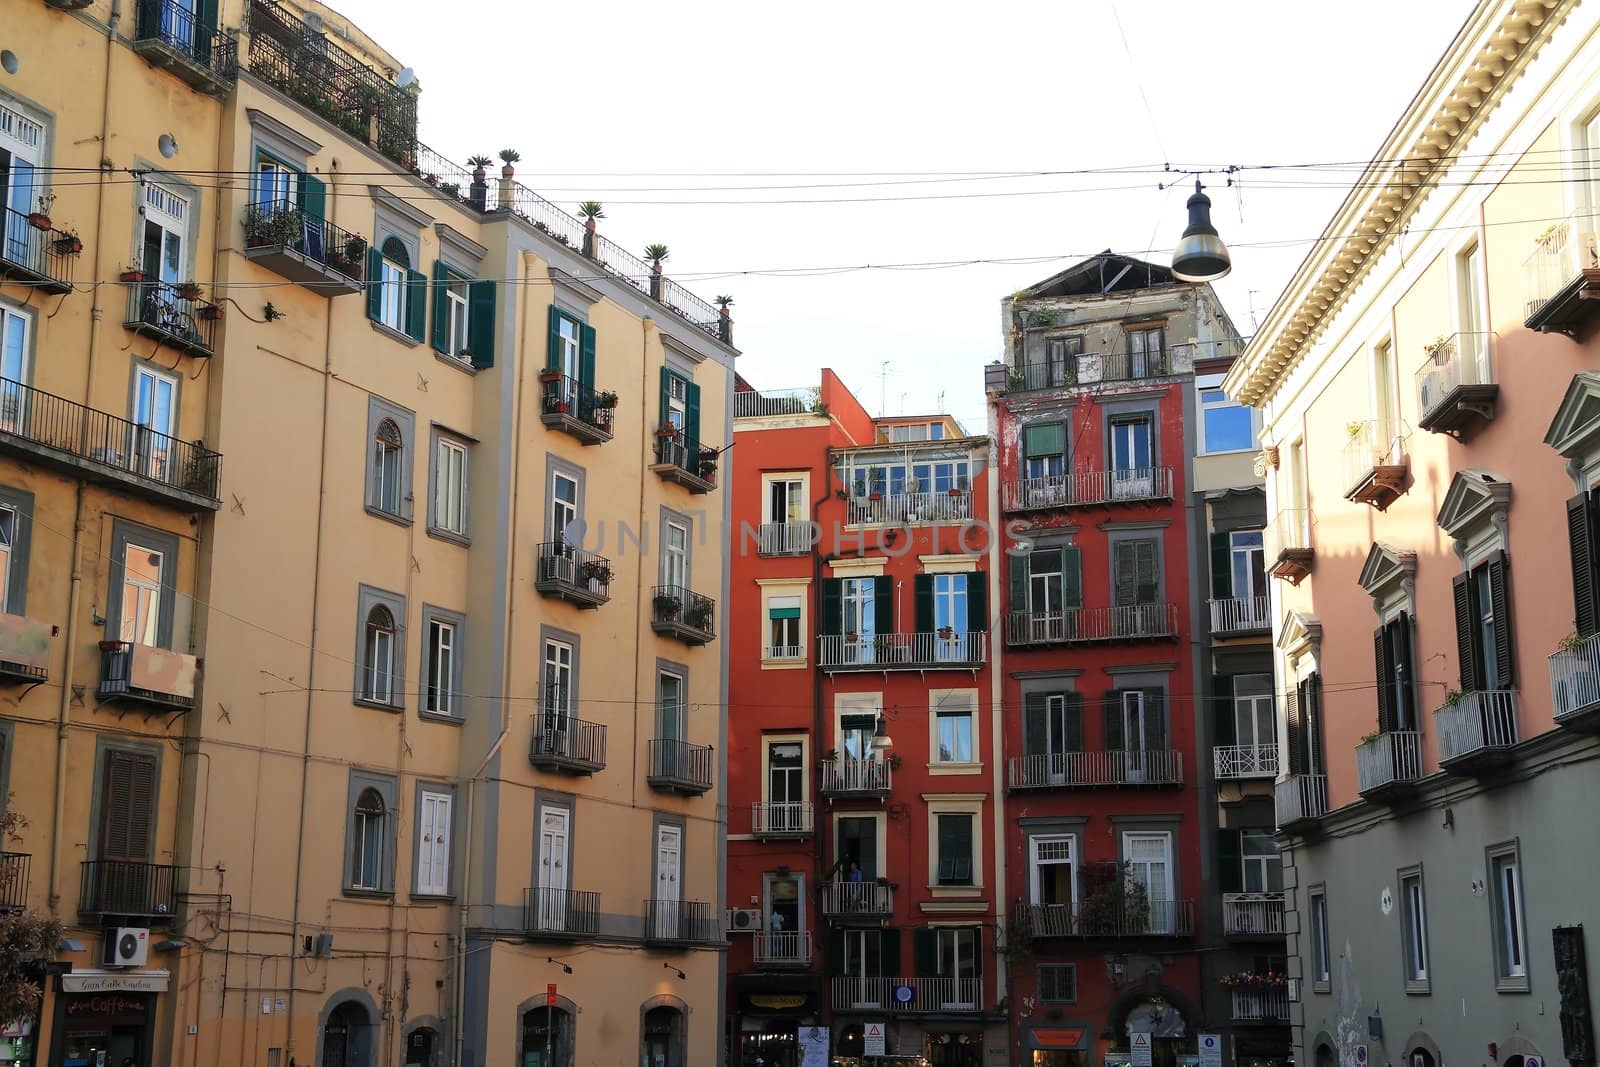 The cramped and busy streets of naples, italy.